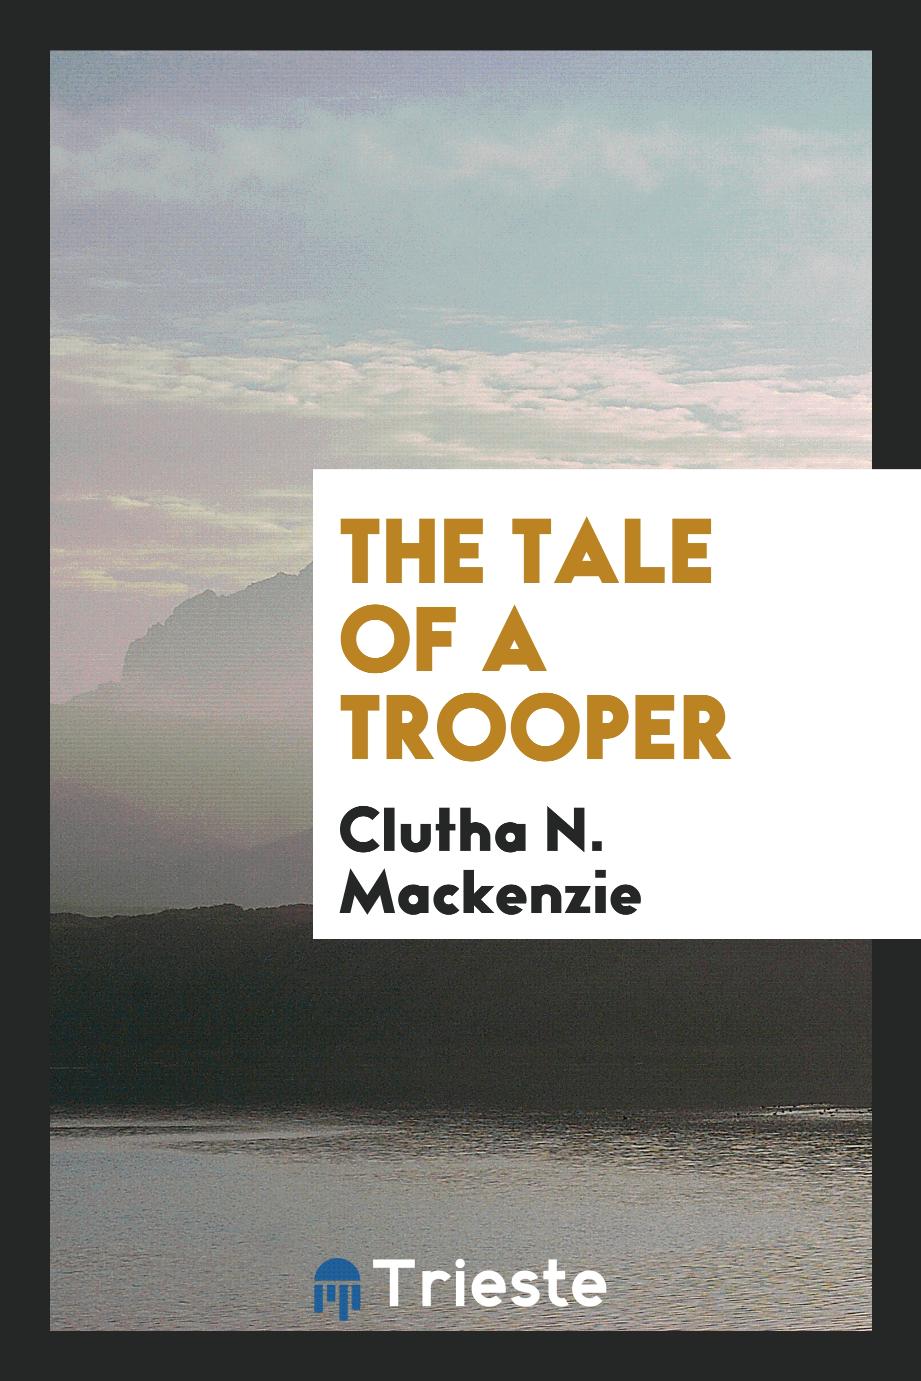 The tale of a trooper